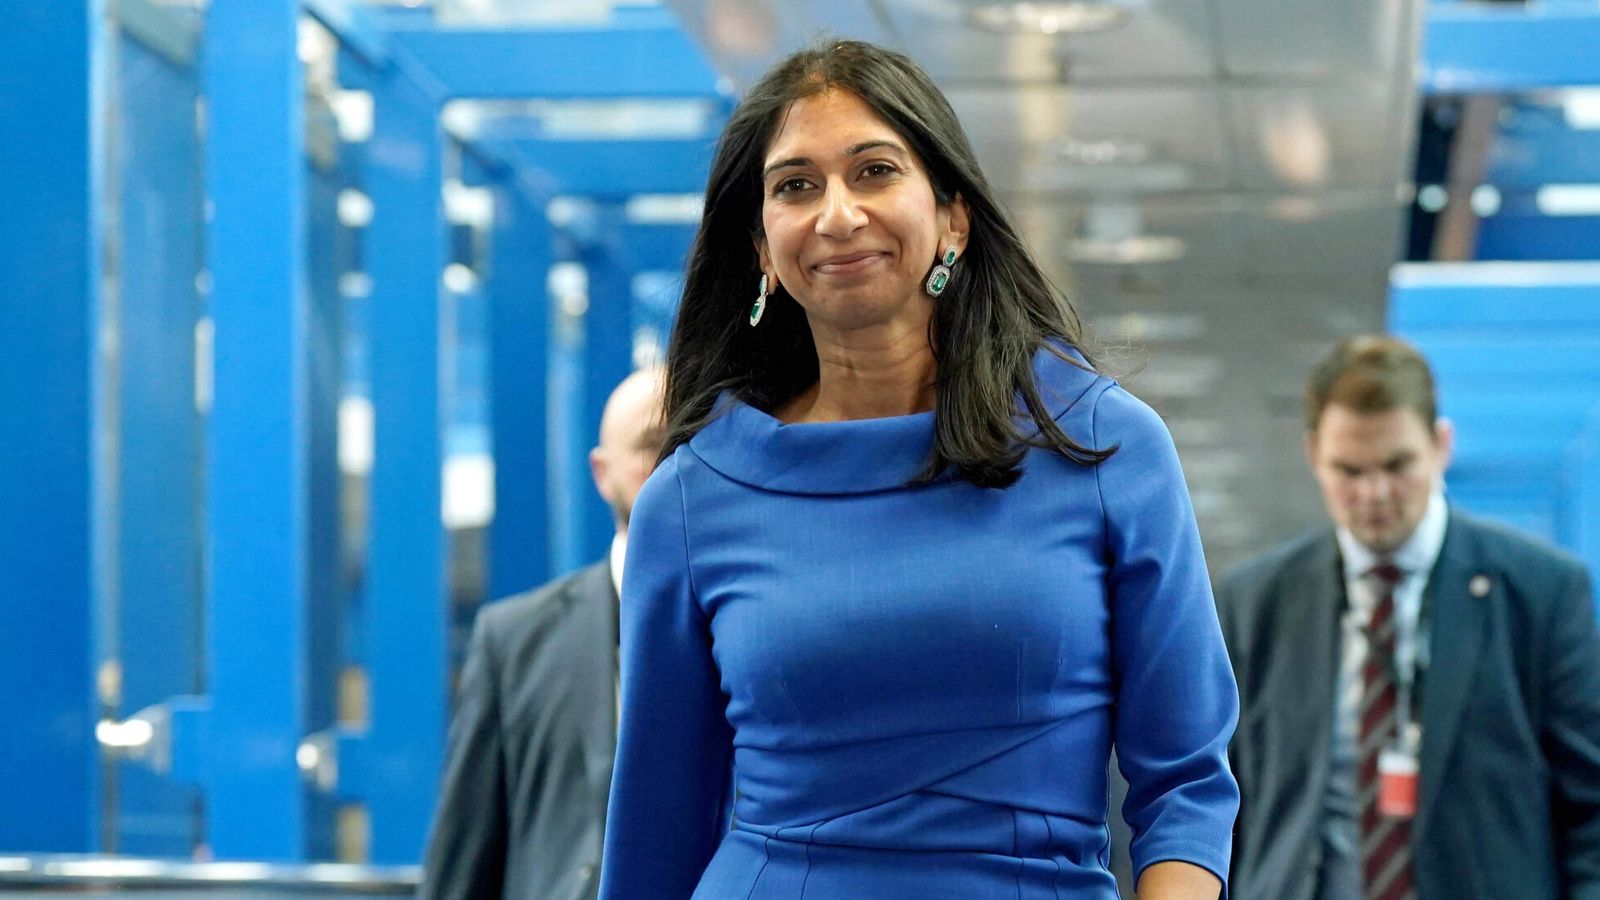 Home Secretary Suella Braverman attacks Tory MPs who 'staged coup' over 45p tax rate and 'Benefit Street culture' in Britain